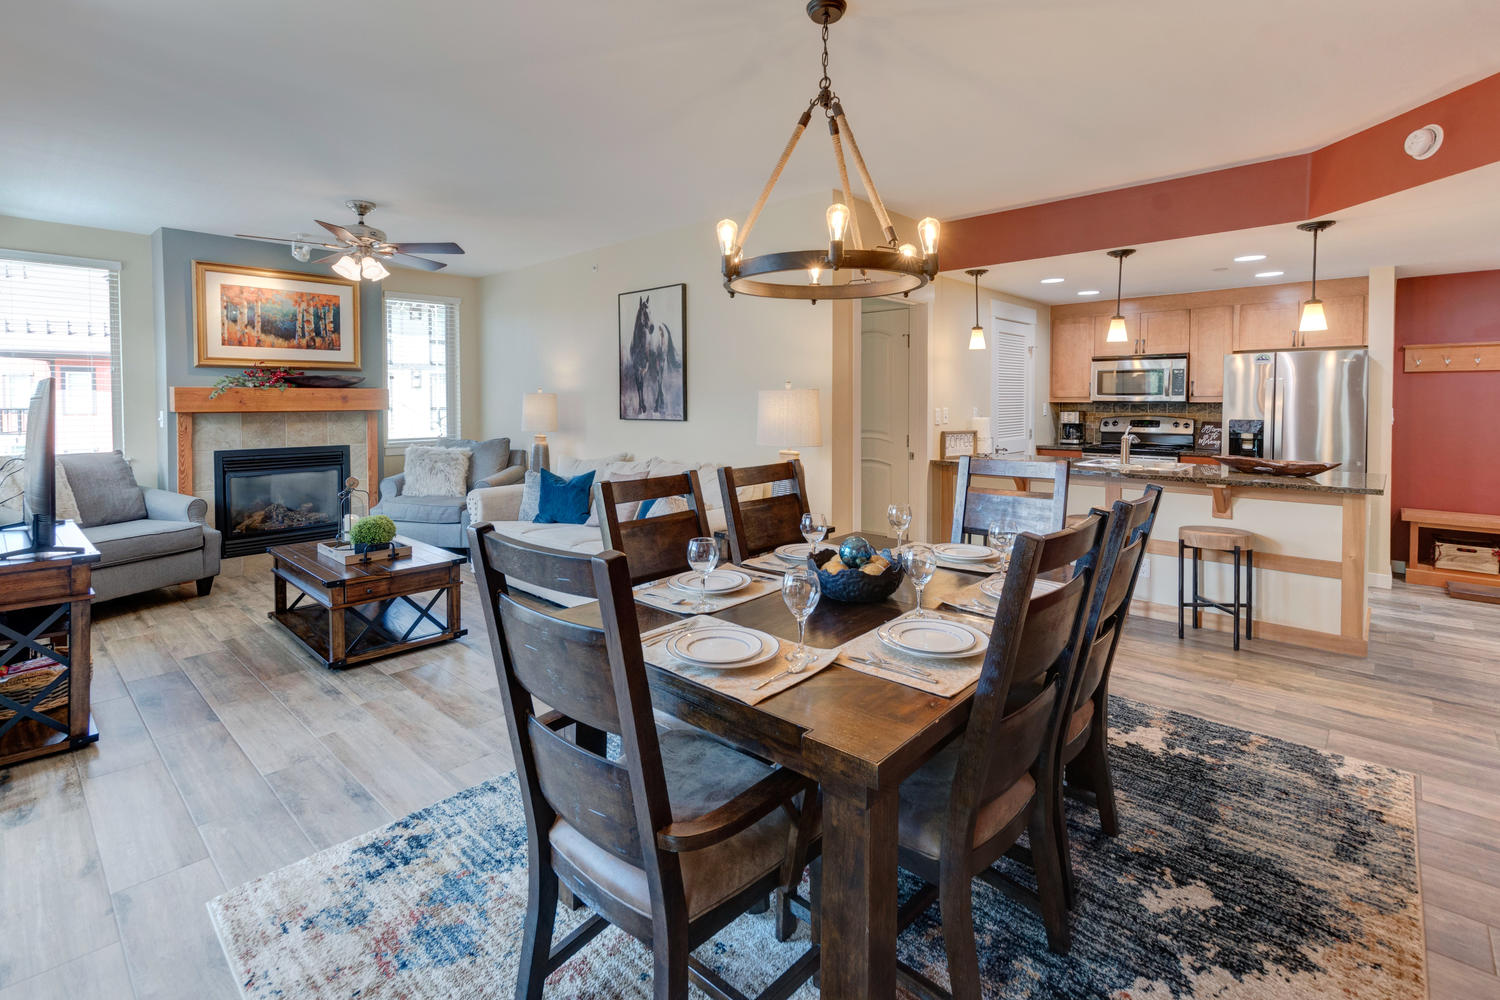 Living and dining areas in our Colorado rentals available for short term stays